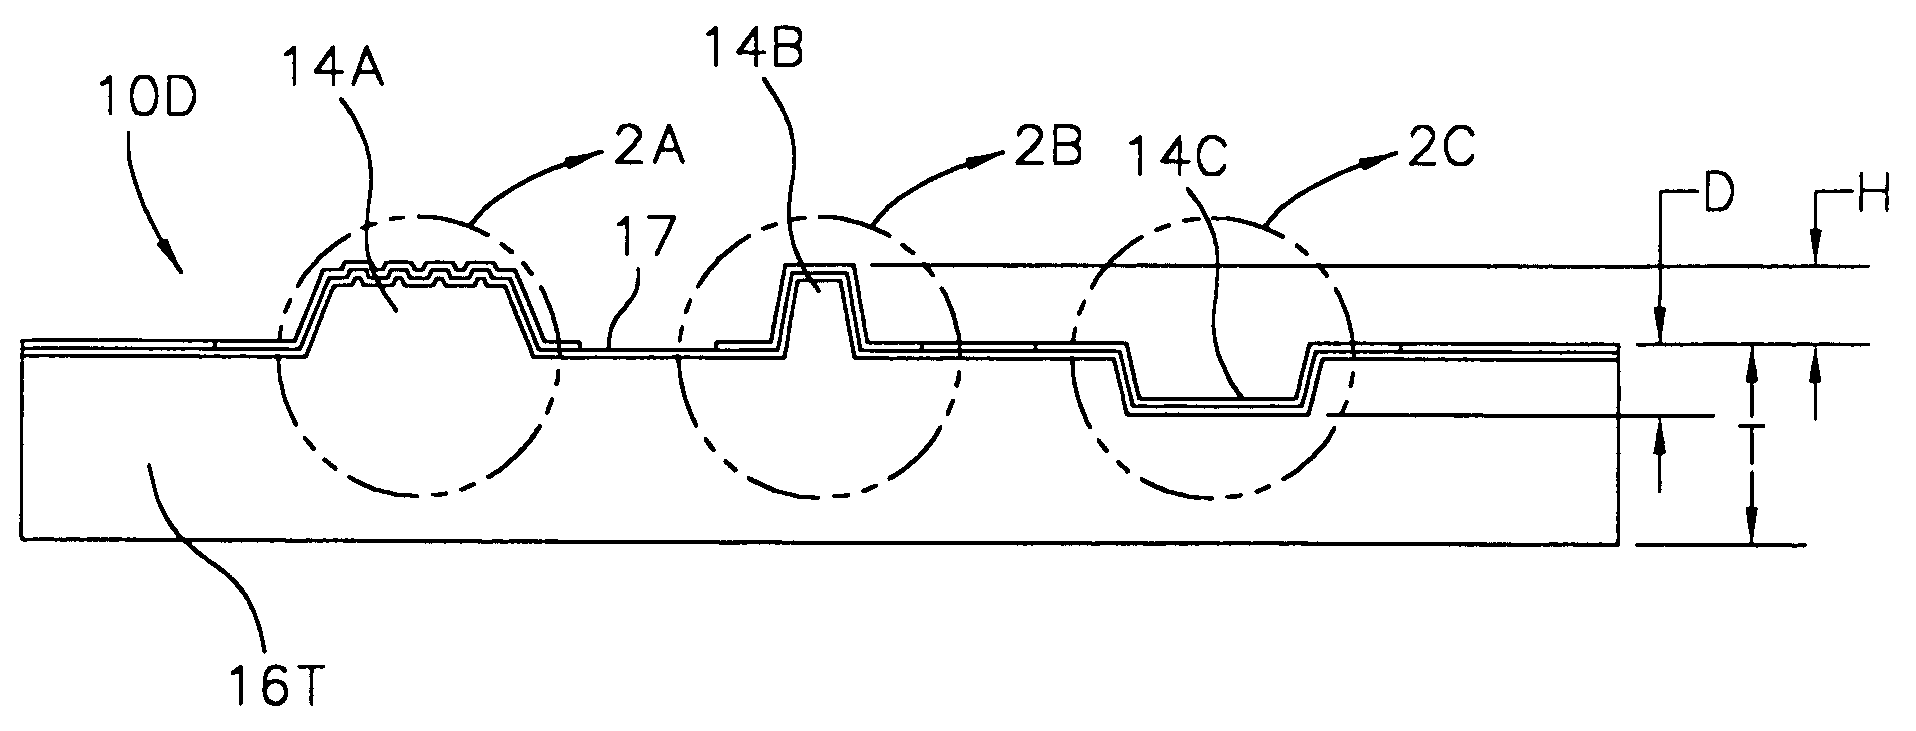 Method for fabricating a silicon carbide interconnect for semiconductor components